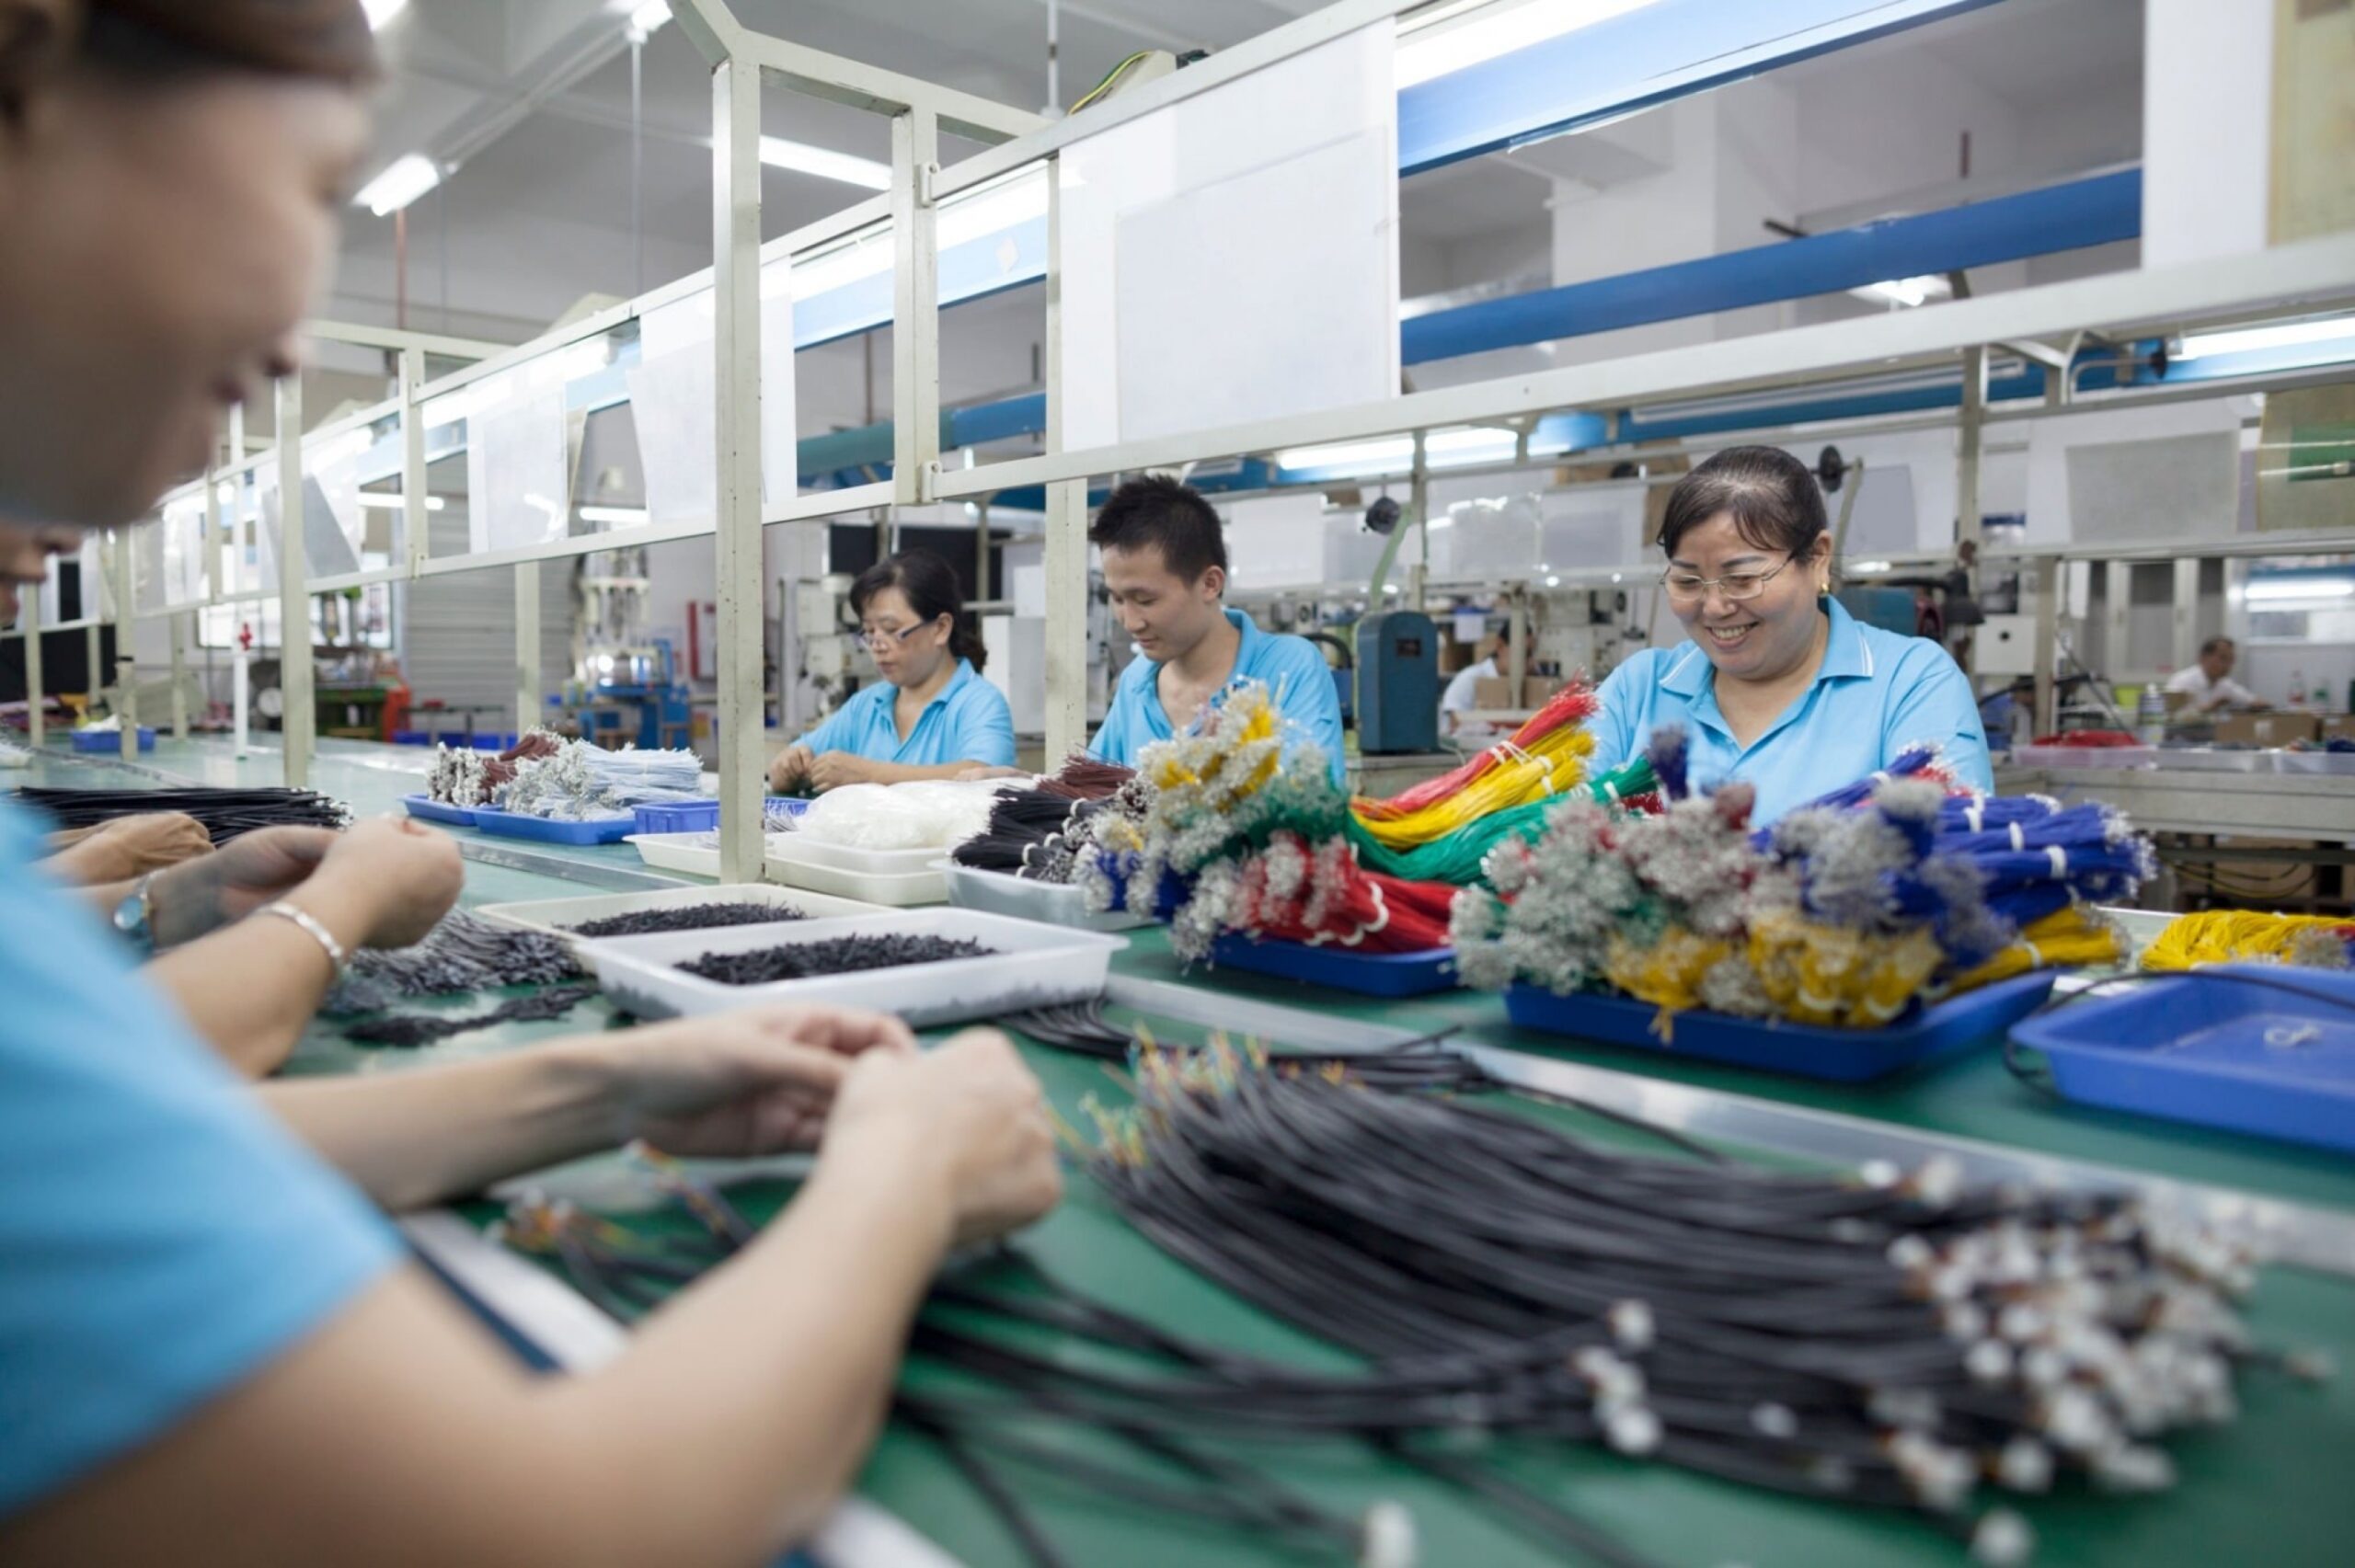 How to find China clothing manufacturer (Tips and strategies)